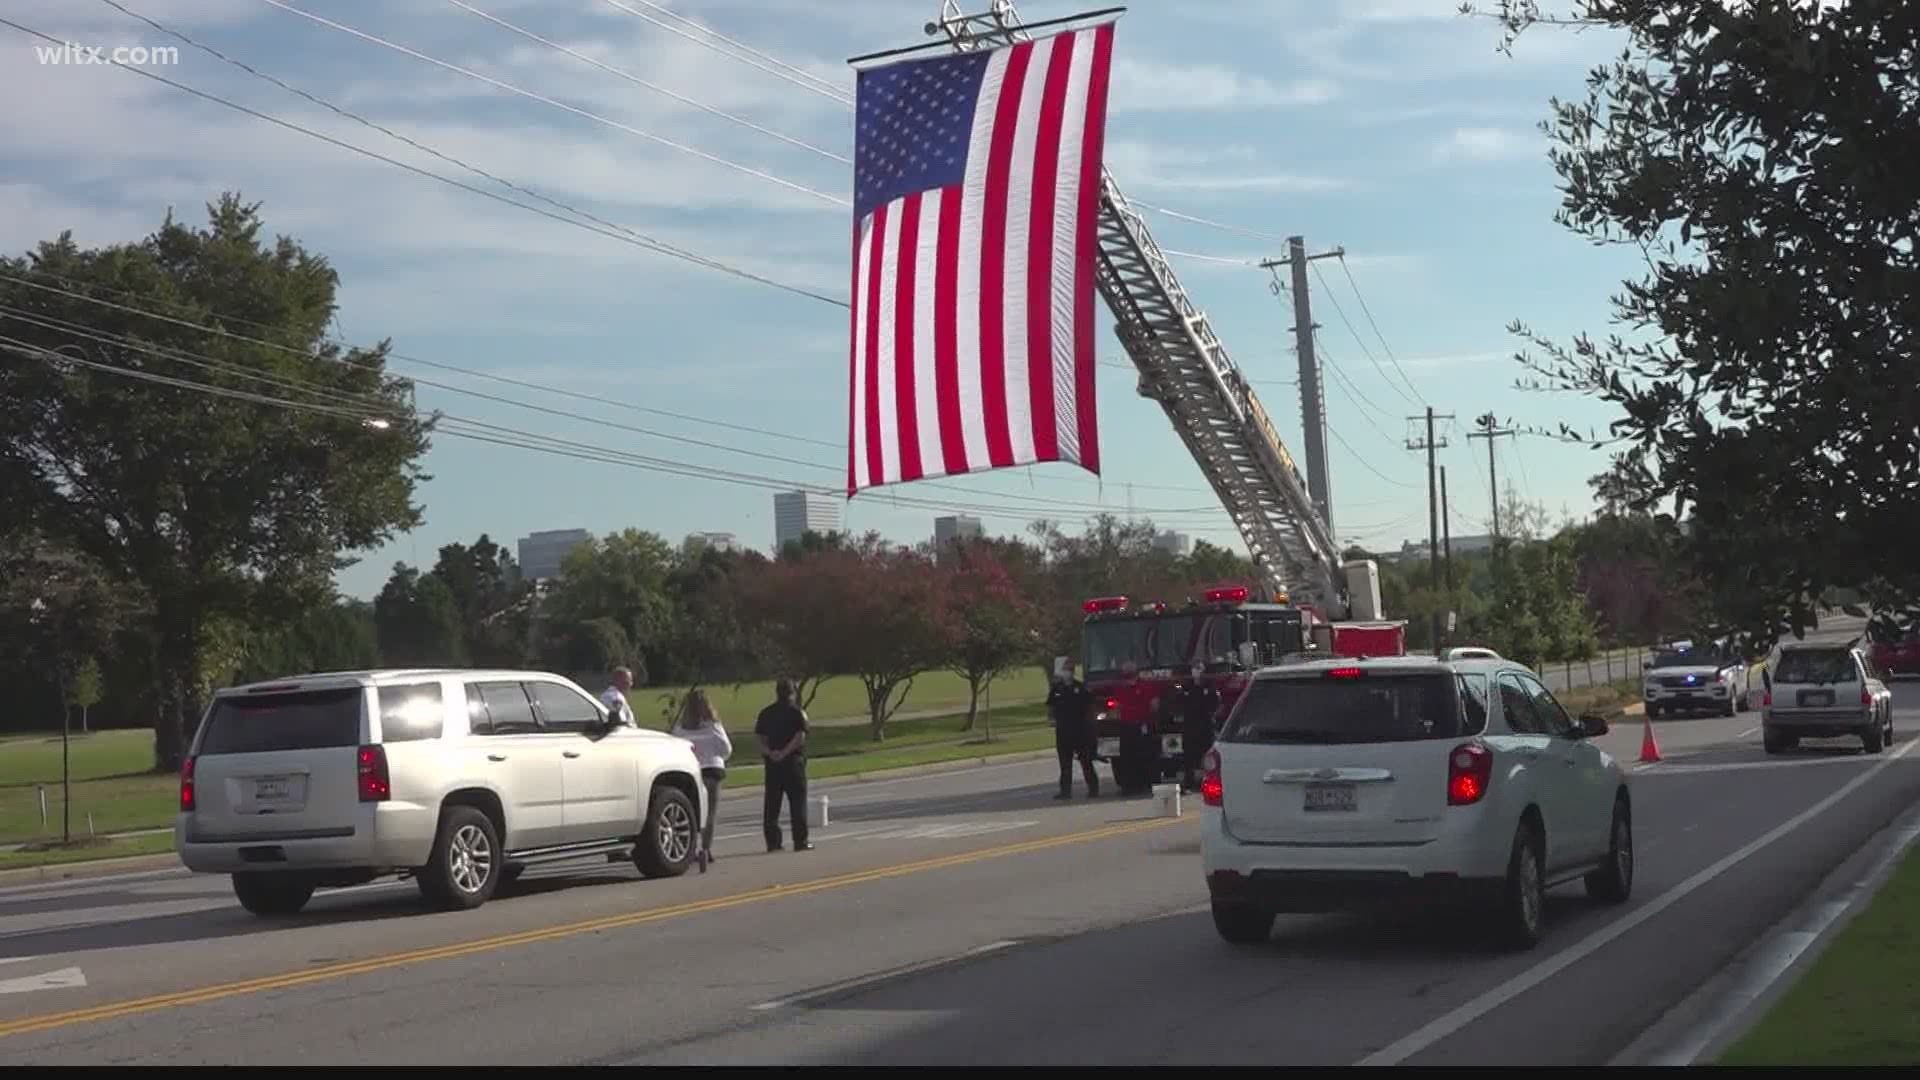 The city of Cayce raised a giant American flag using fire trucks in remembrance of those who died on September 11, 2001.